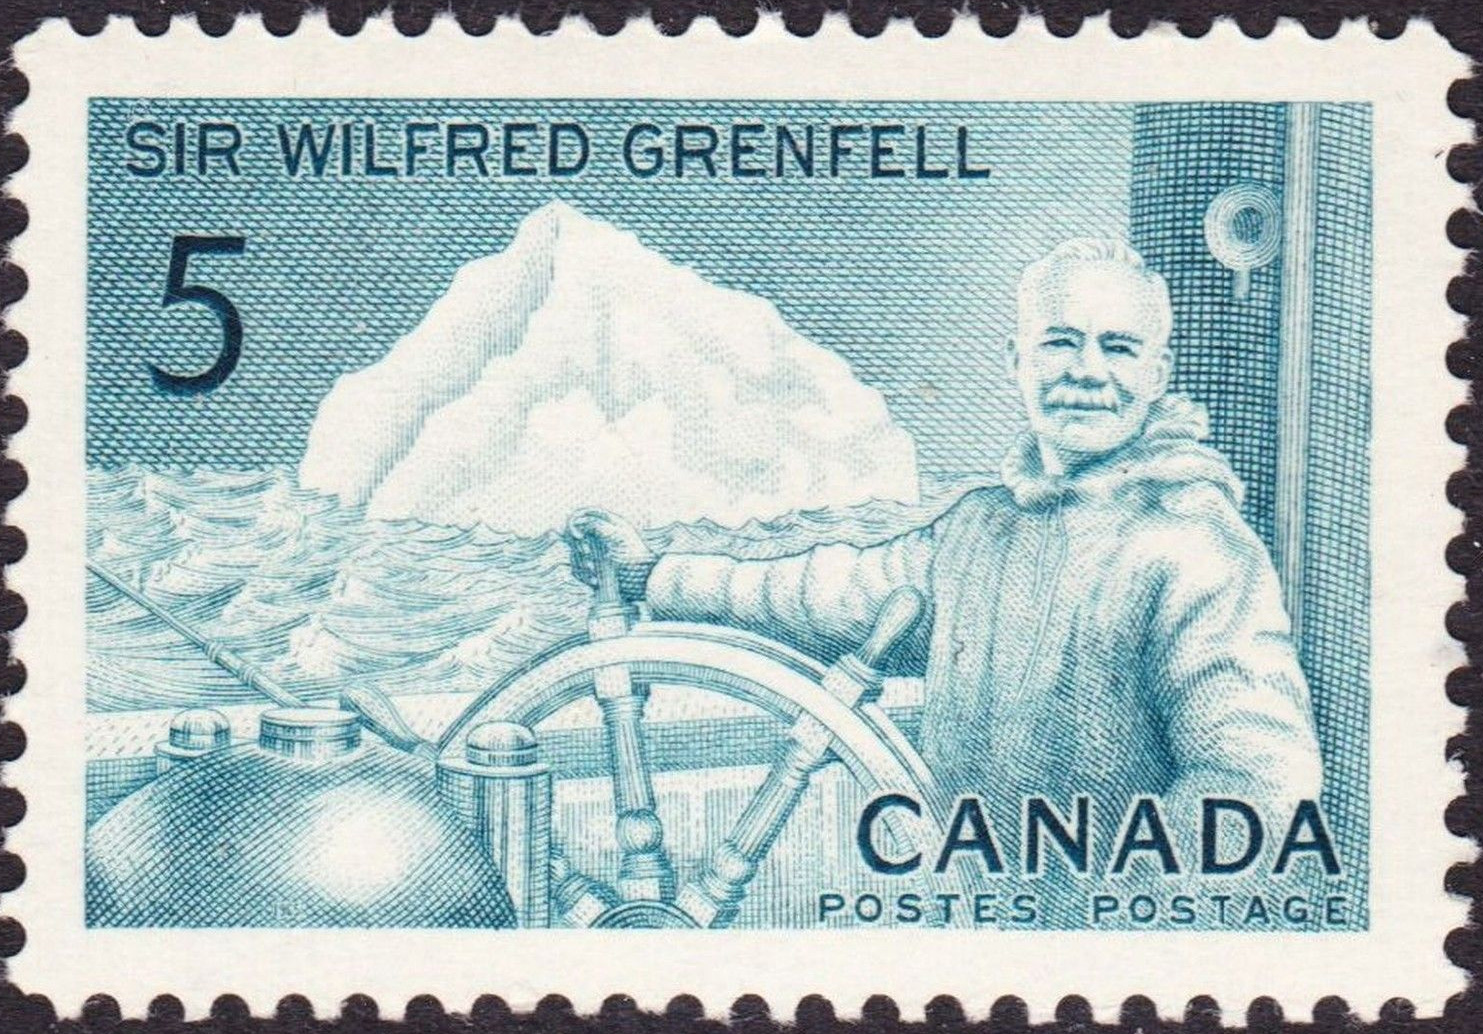 Stampsandcanada Wilfred Grenfell 5 Cents 1965 Stamps Of Canada Price Guide And Value